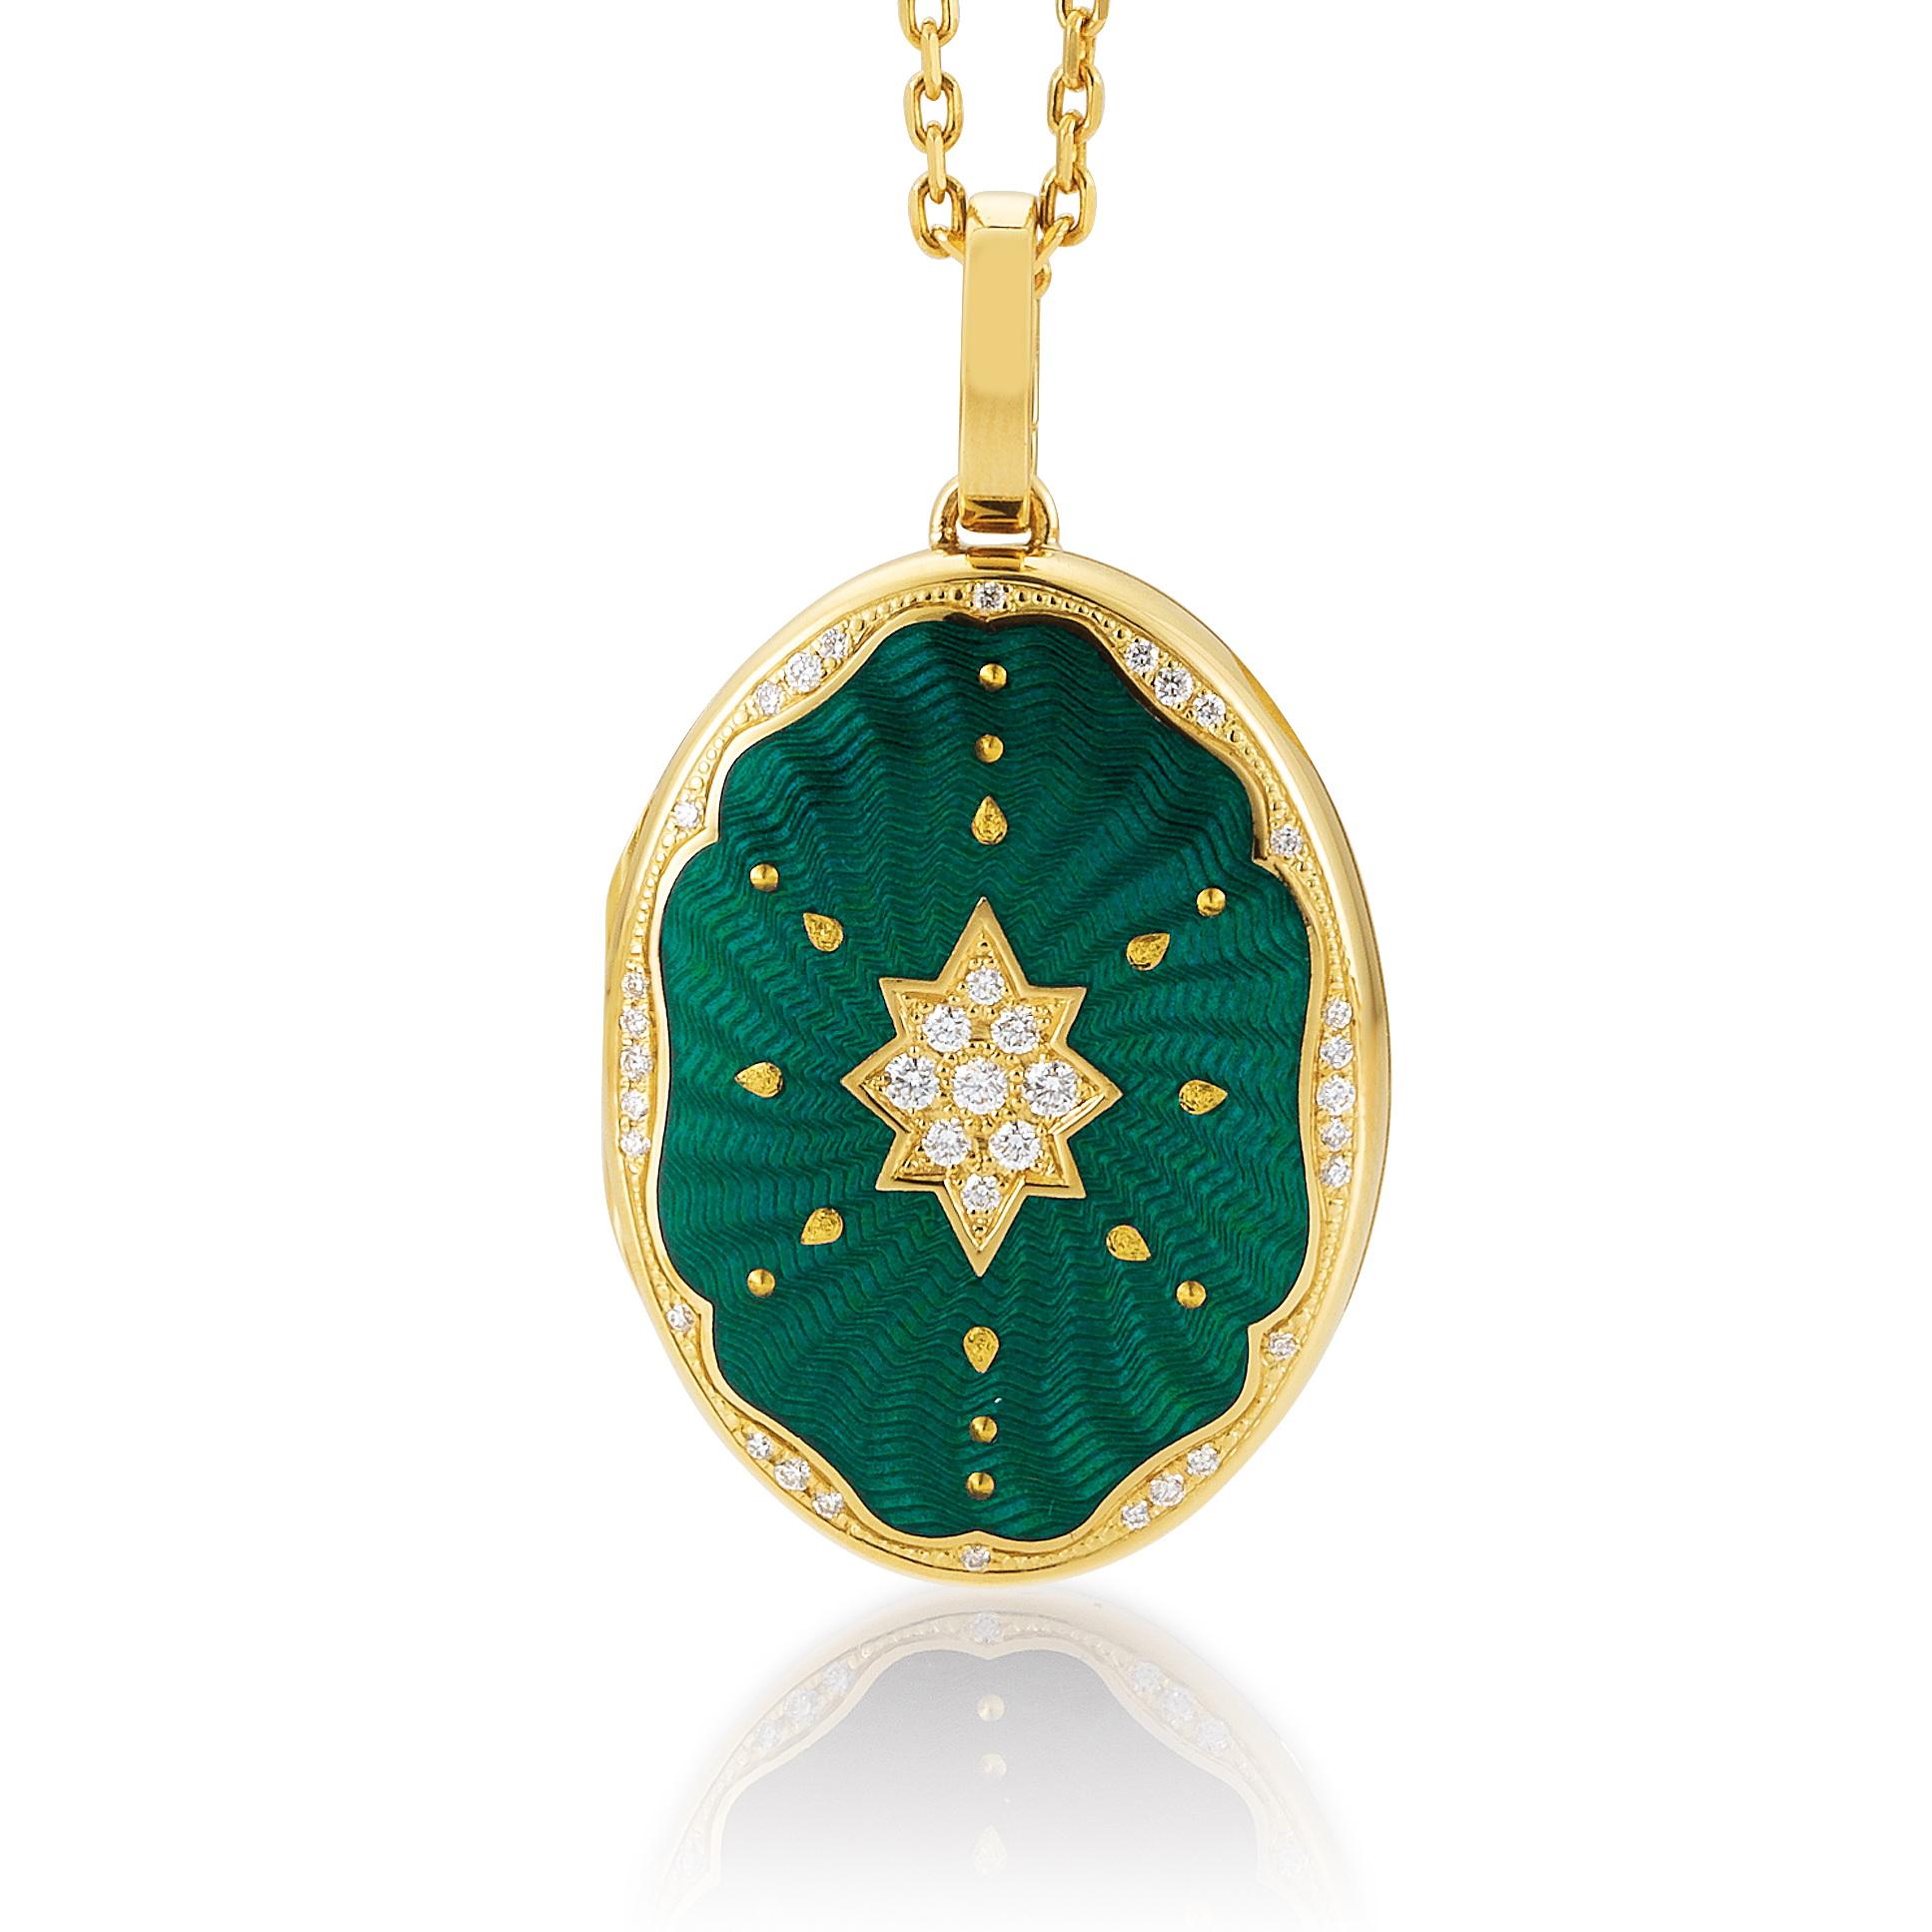 Victorian Oval Locket Pendant Necklace 18k Yellow Gold Green Enamel 37 Diamonds 0.29 ct For Sale